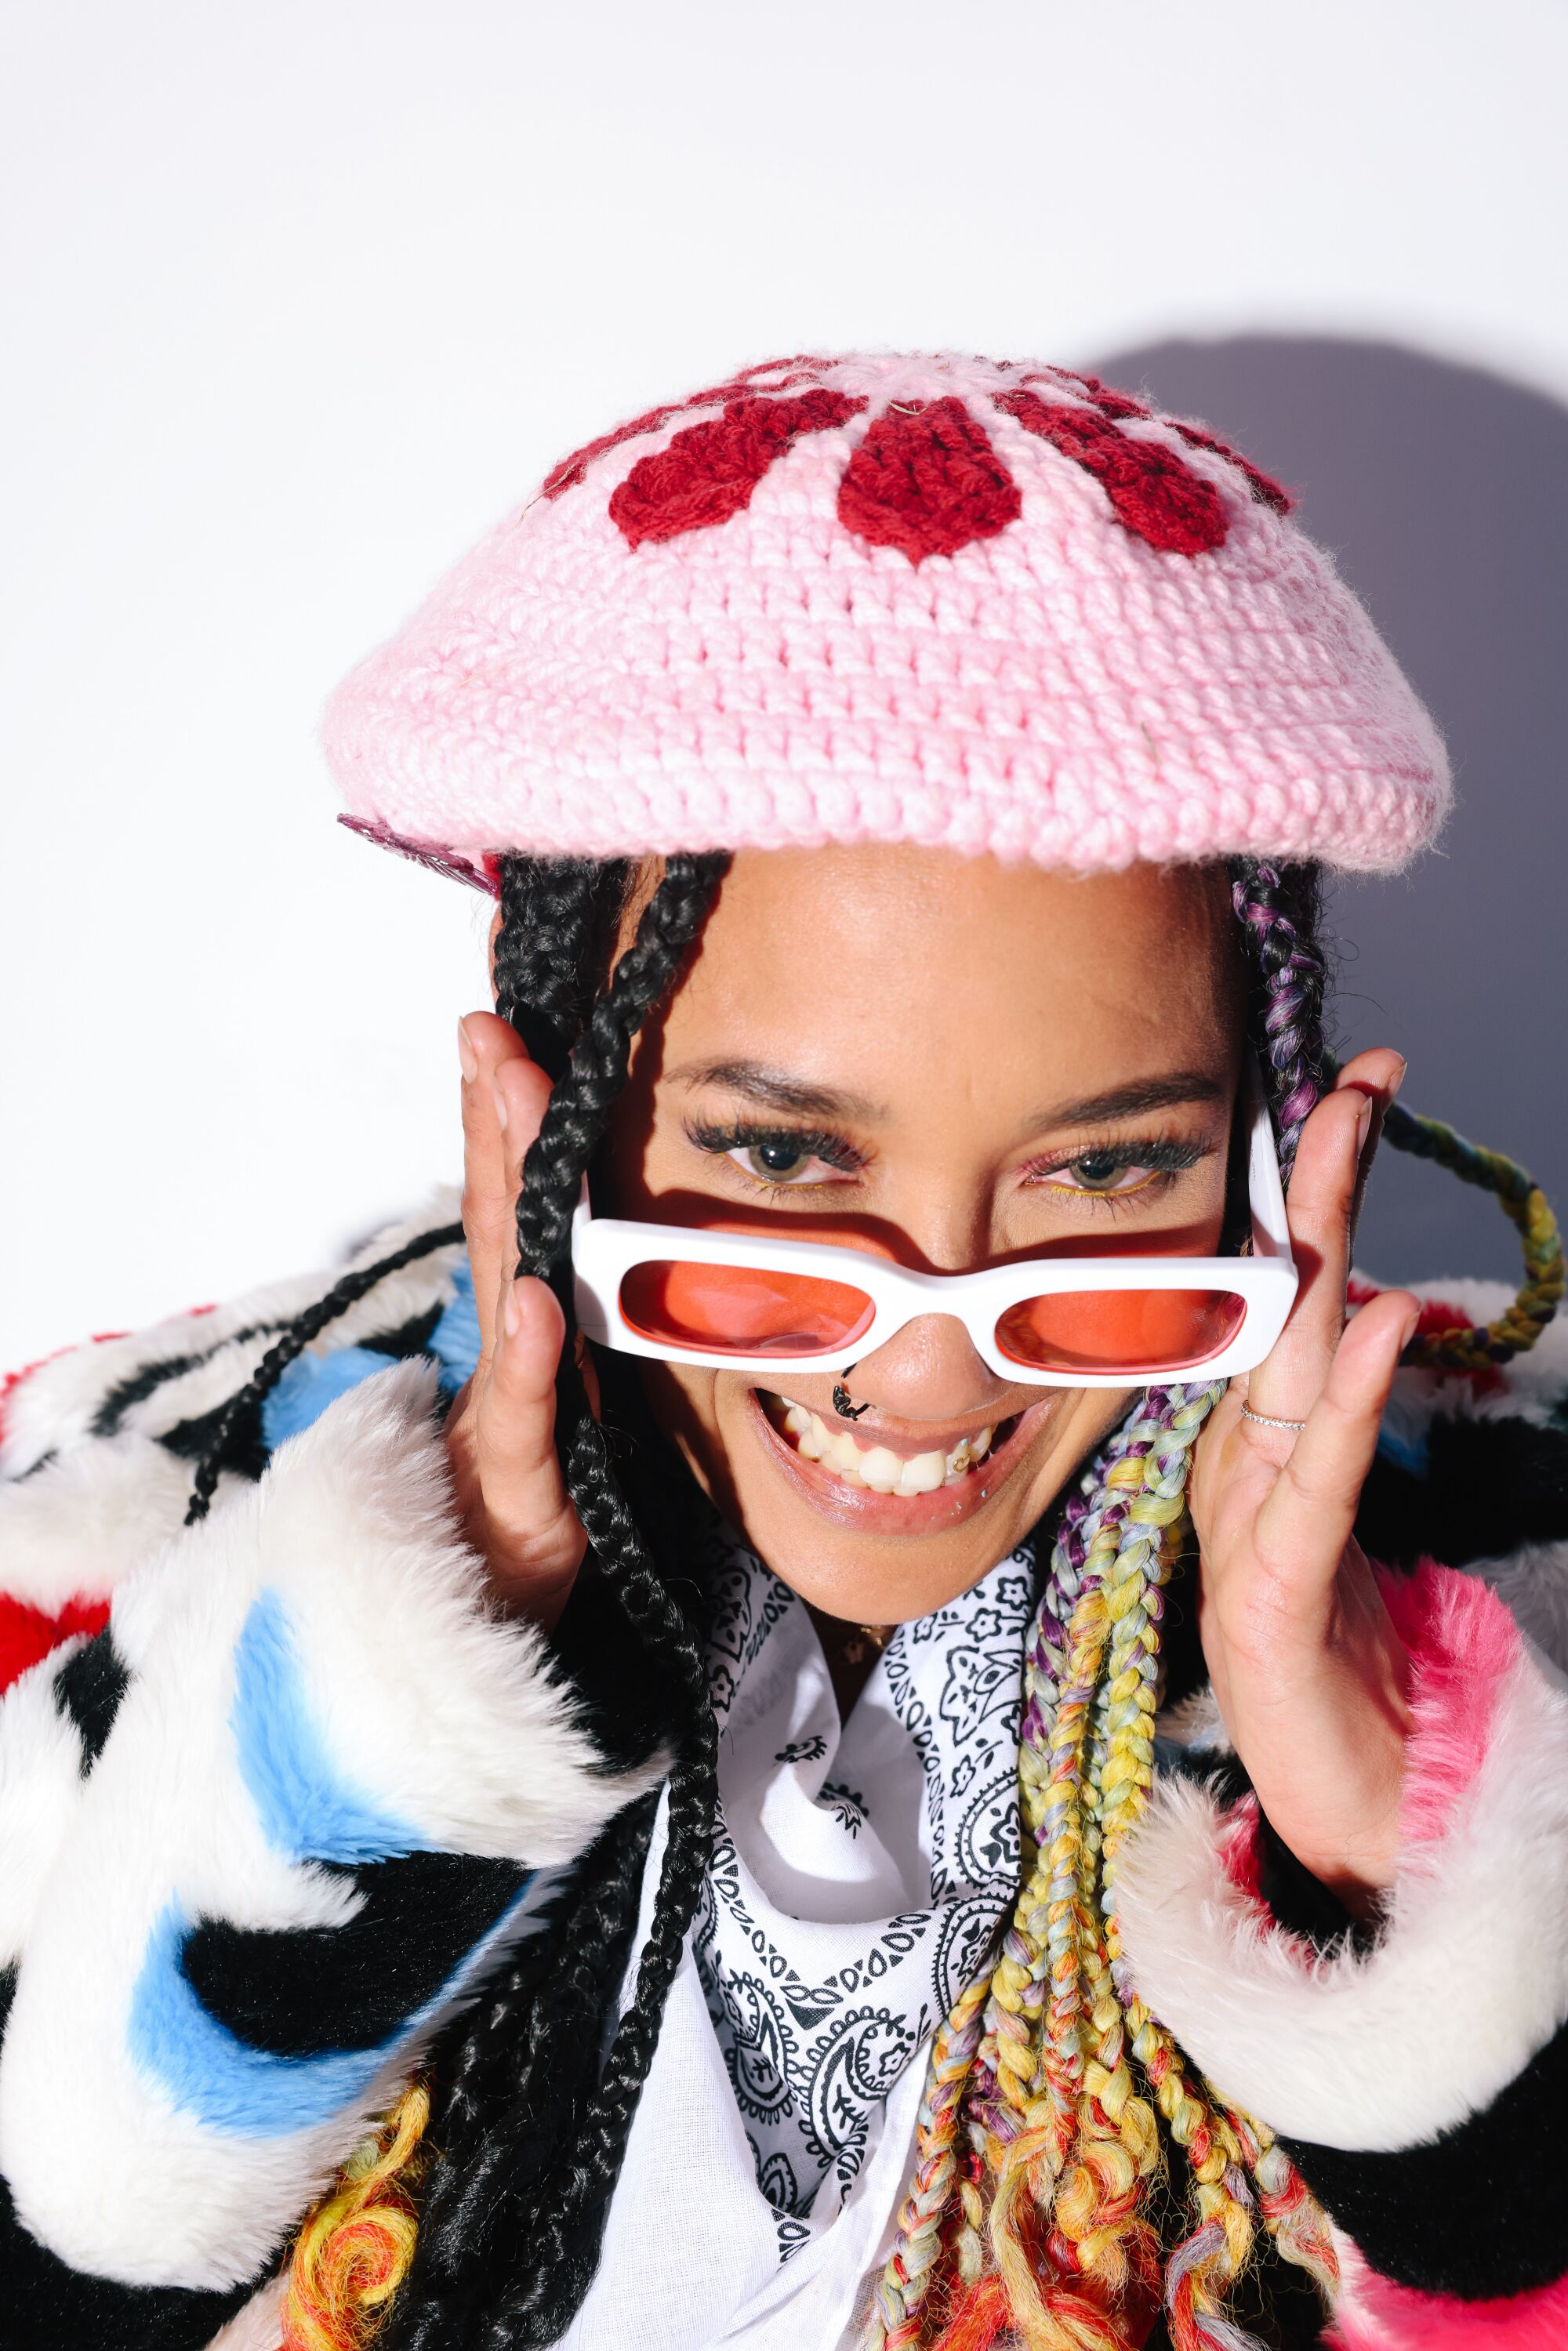 A woman poses wearing a colorful furry rainbow coat, pink and red crocheted hat and white sunglasses with pink lenses